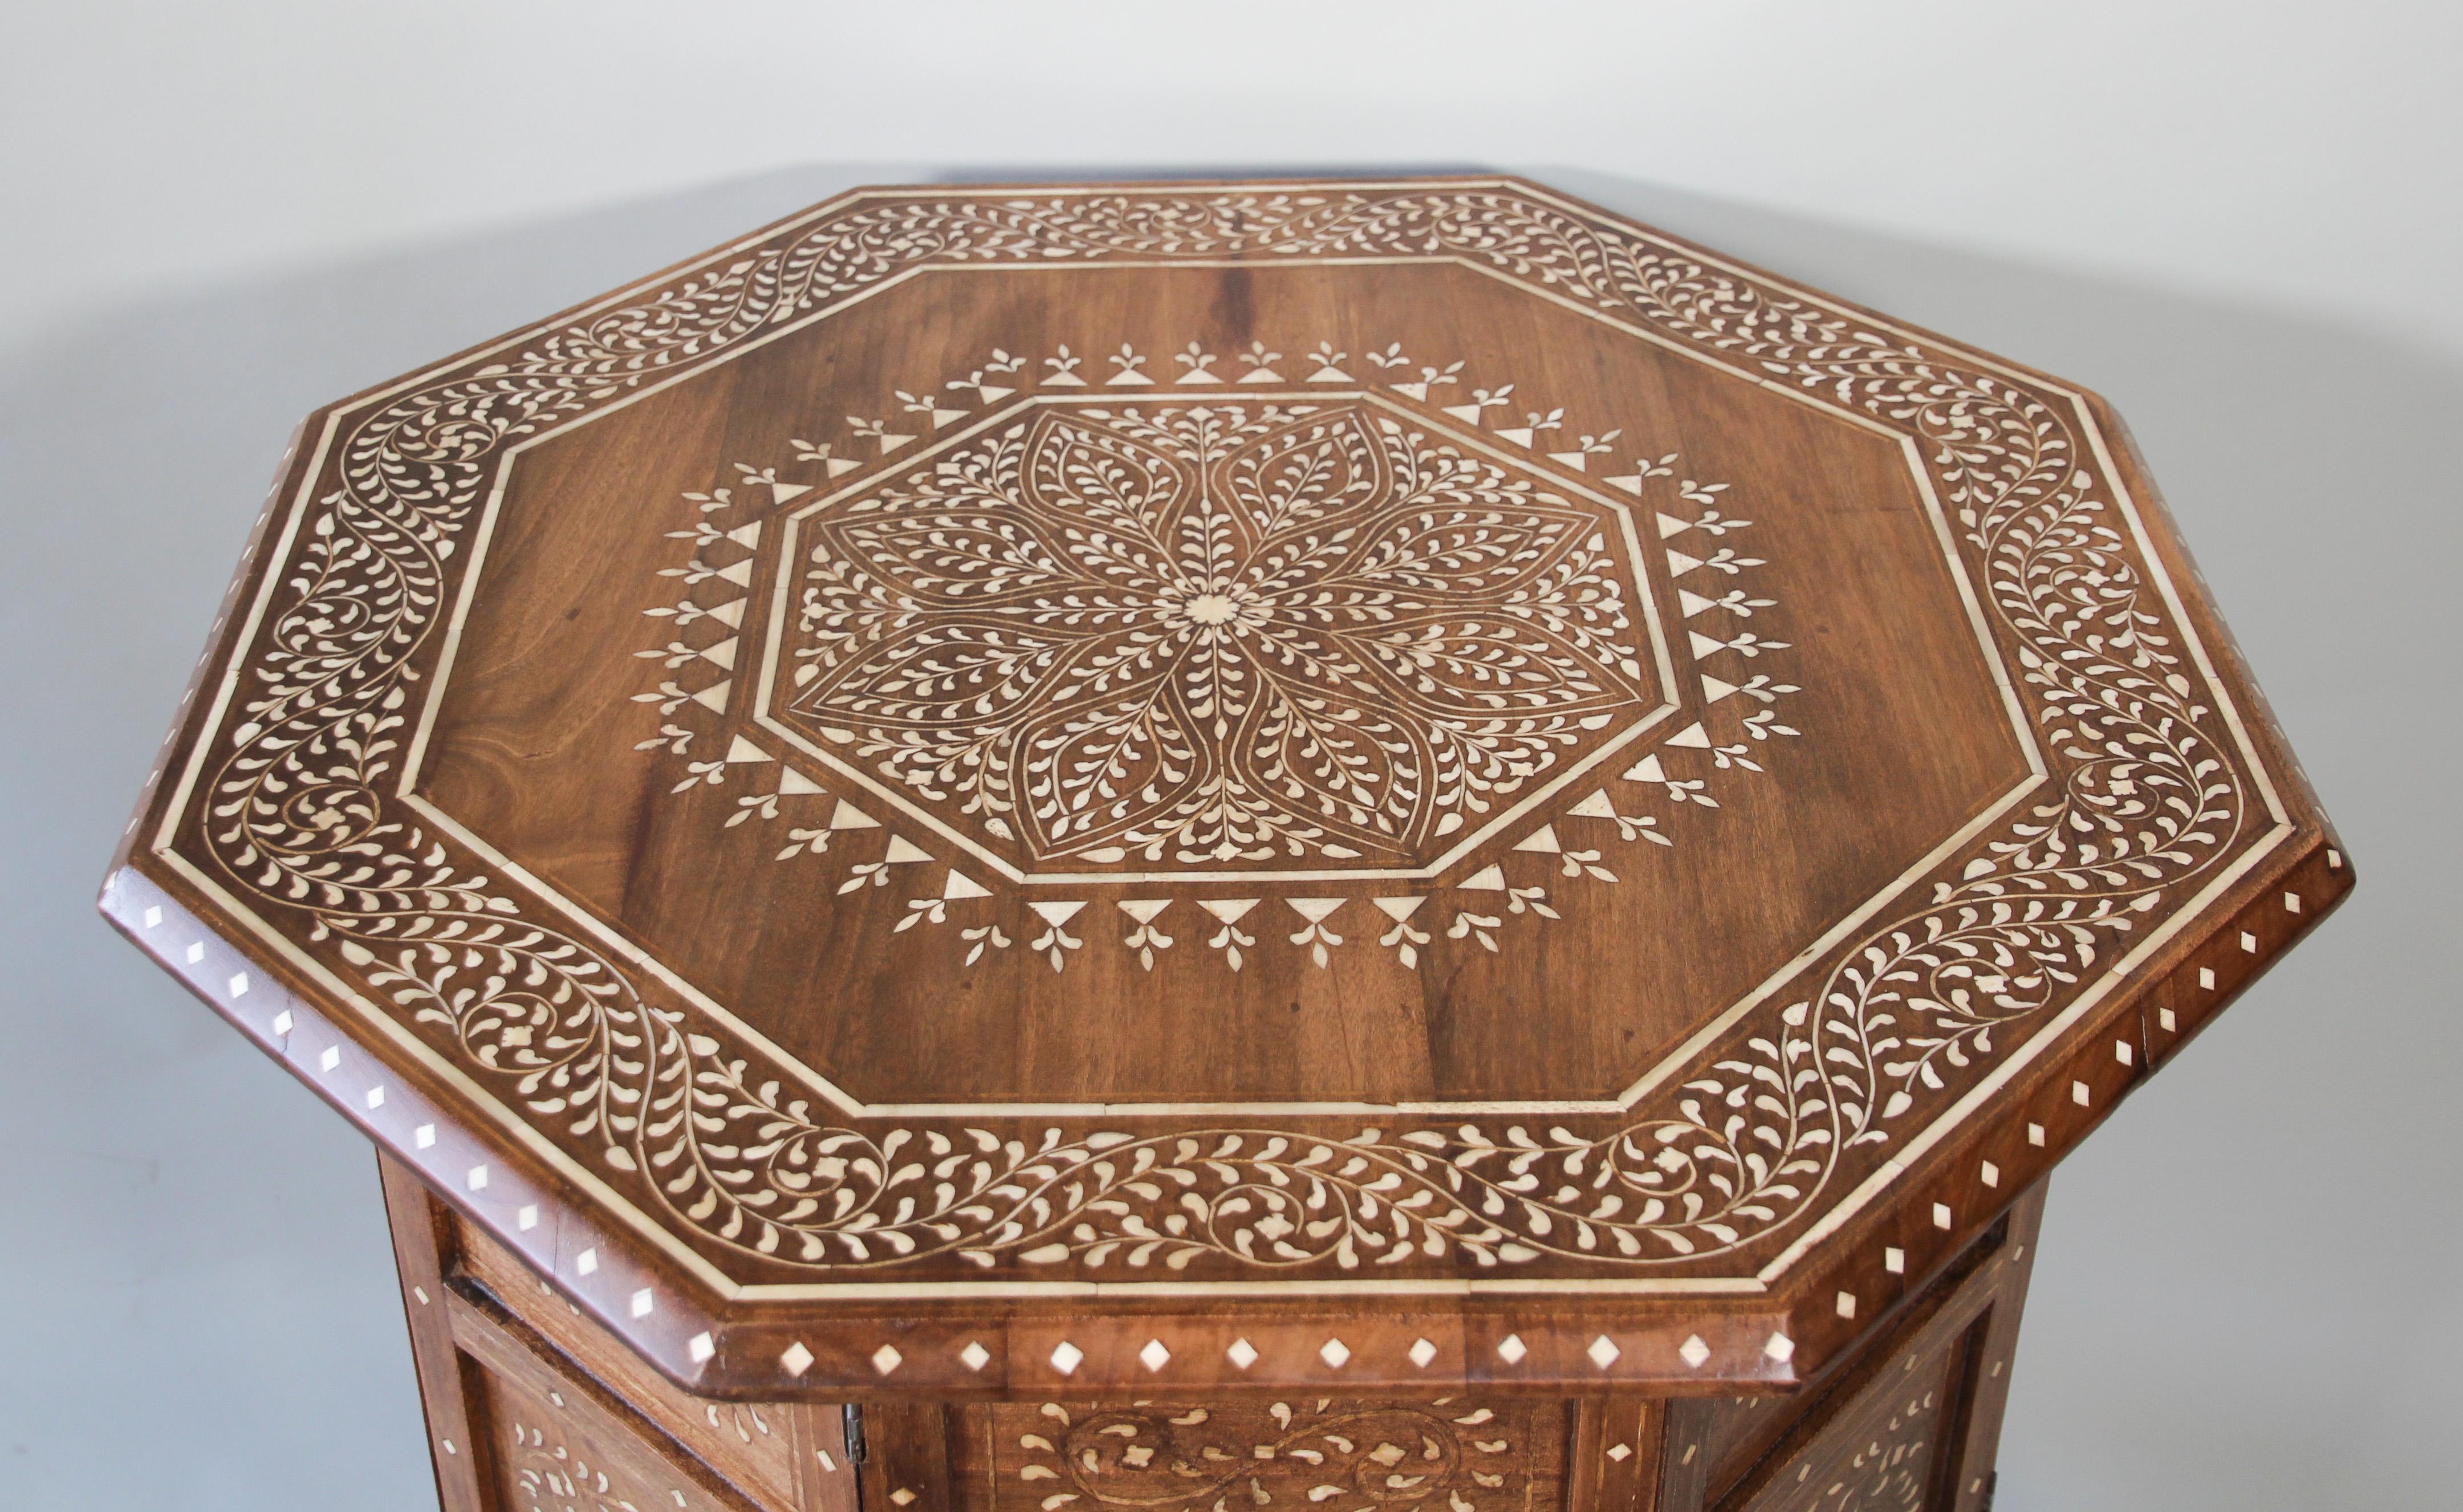 20th Century Anglo-Indian Mughal Octagonal Moorish Table with Inlay